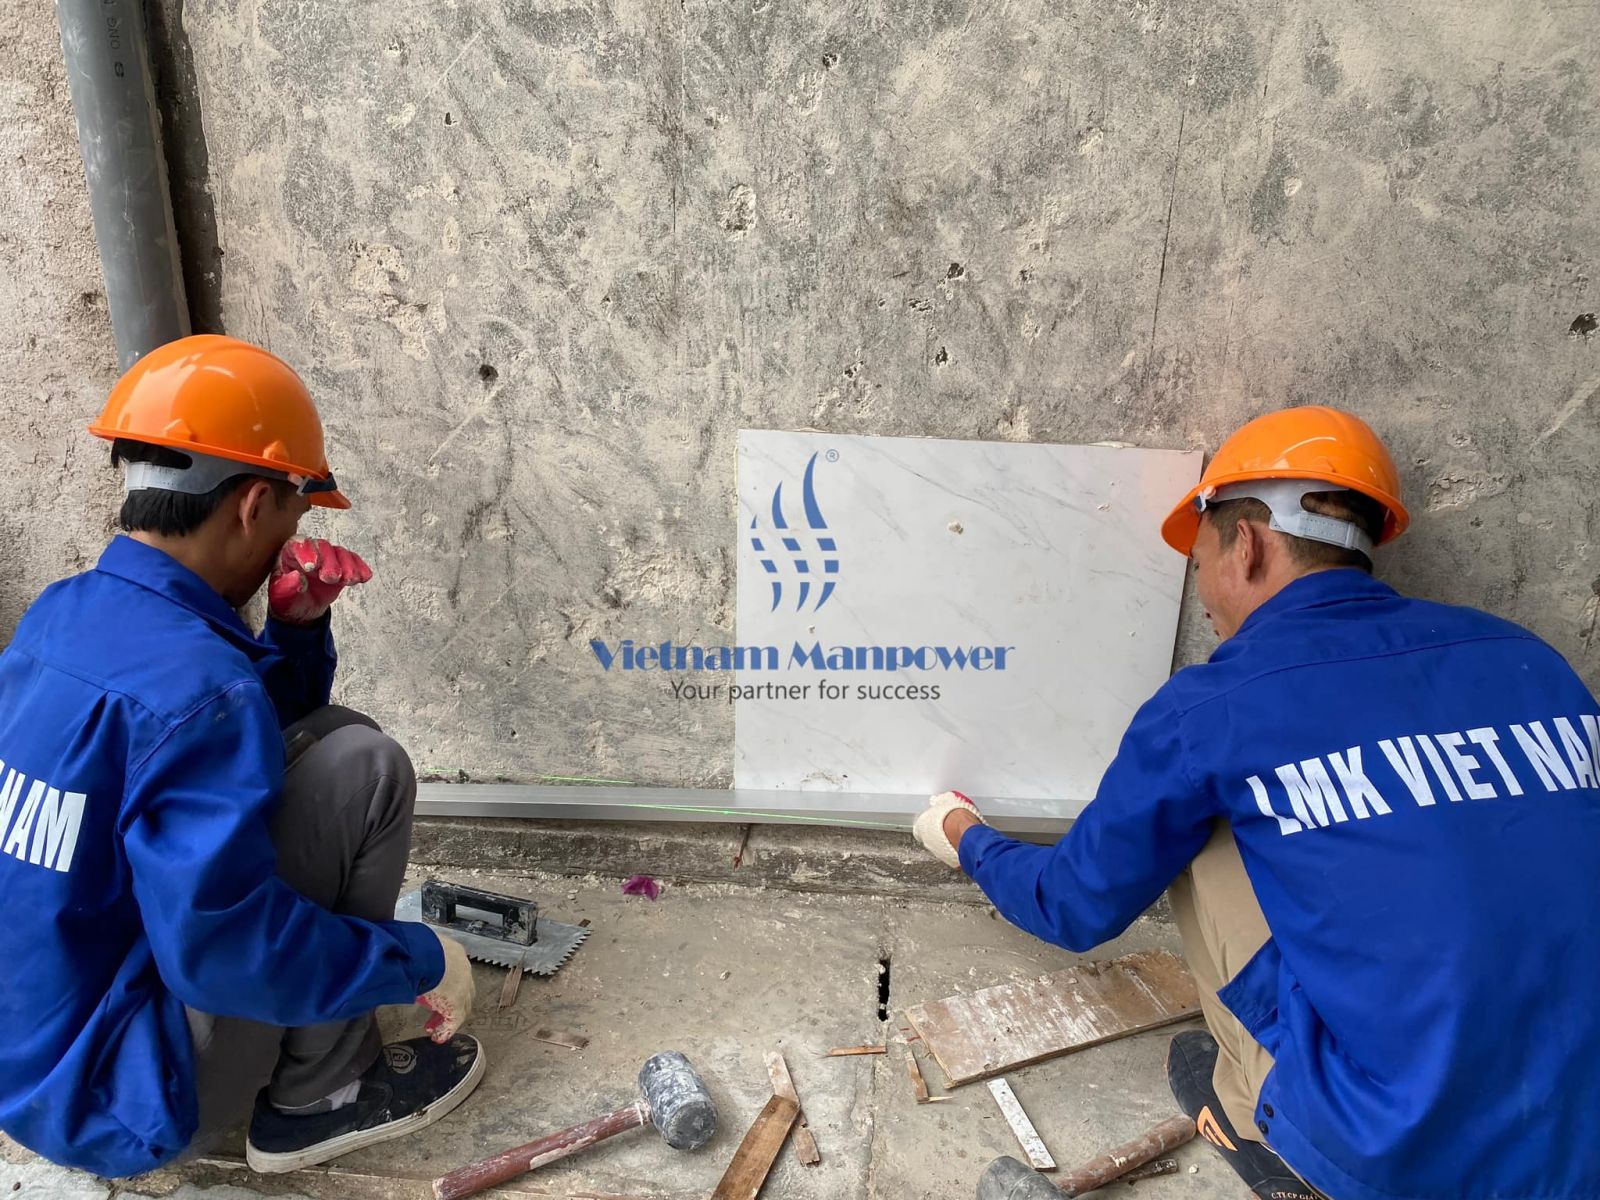 Vietnam Manpower provides construction workers for business in Spain